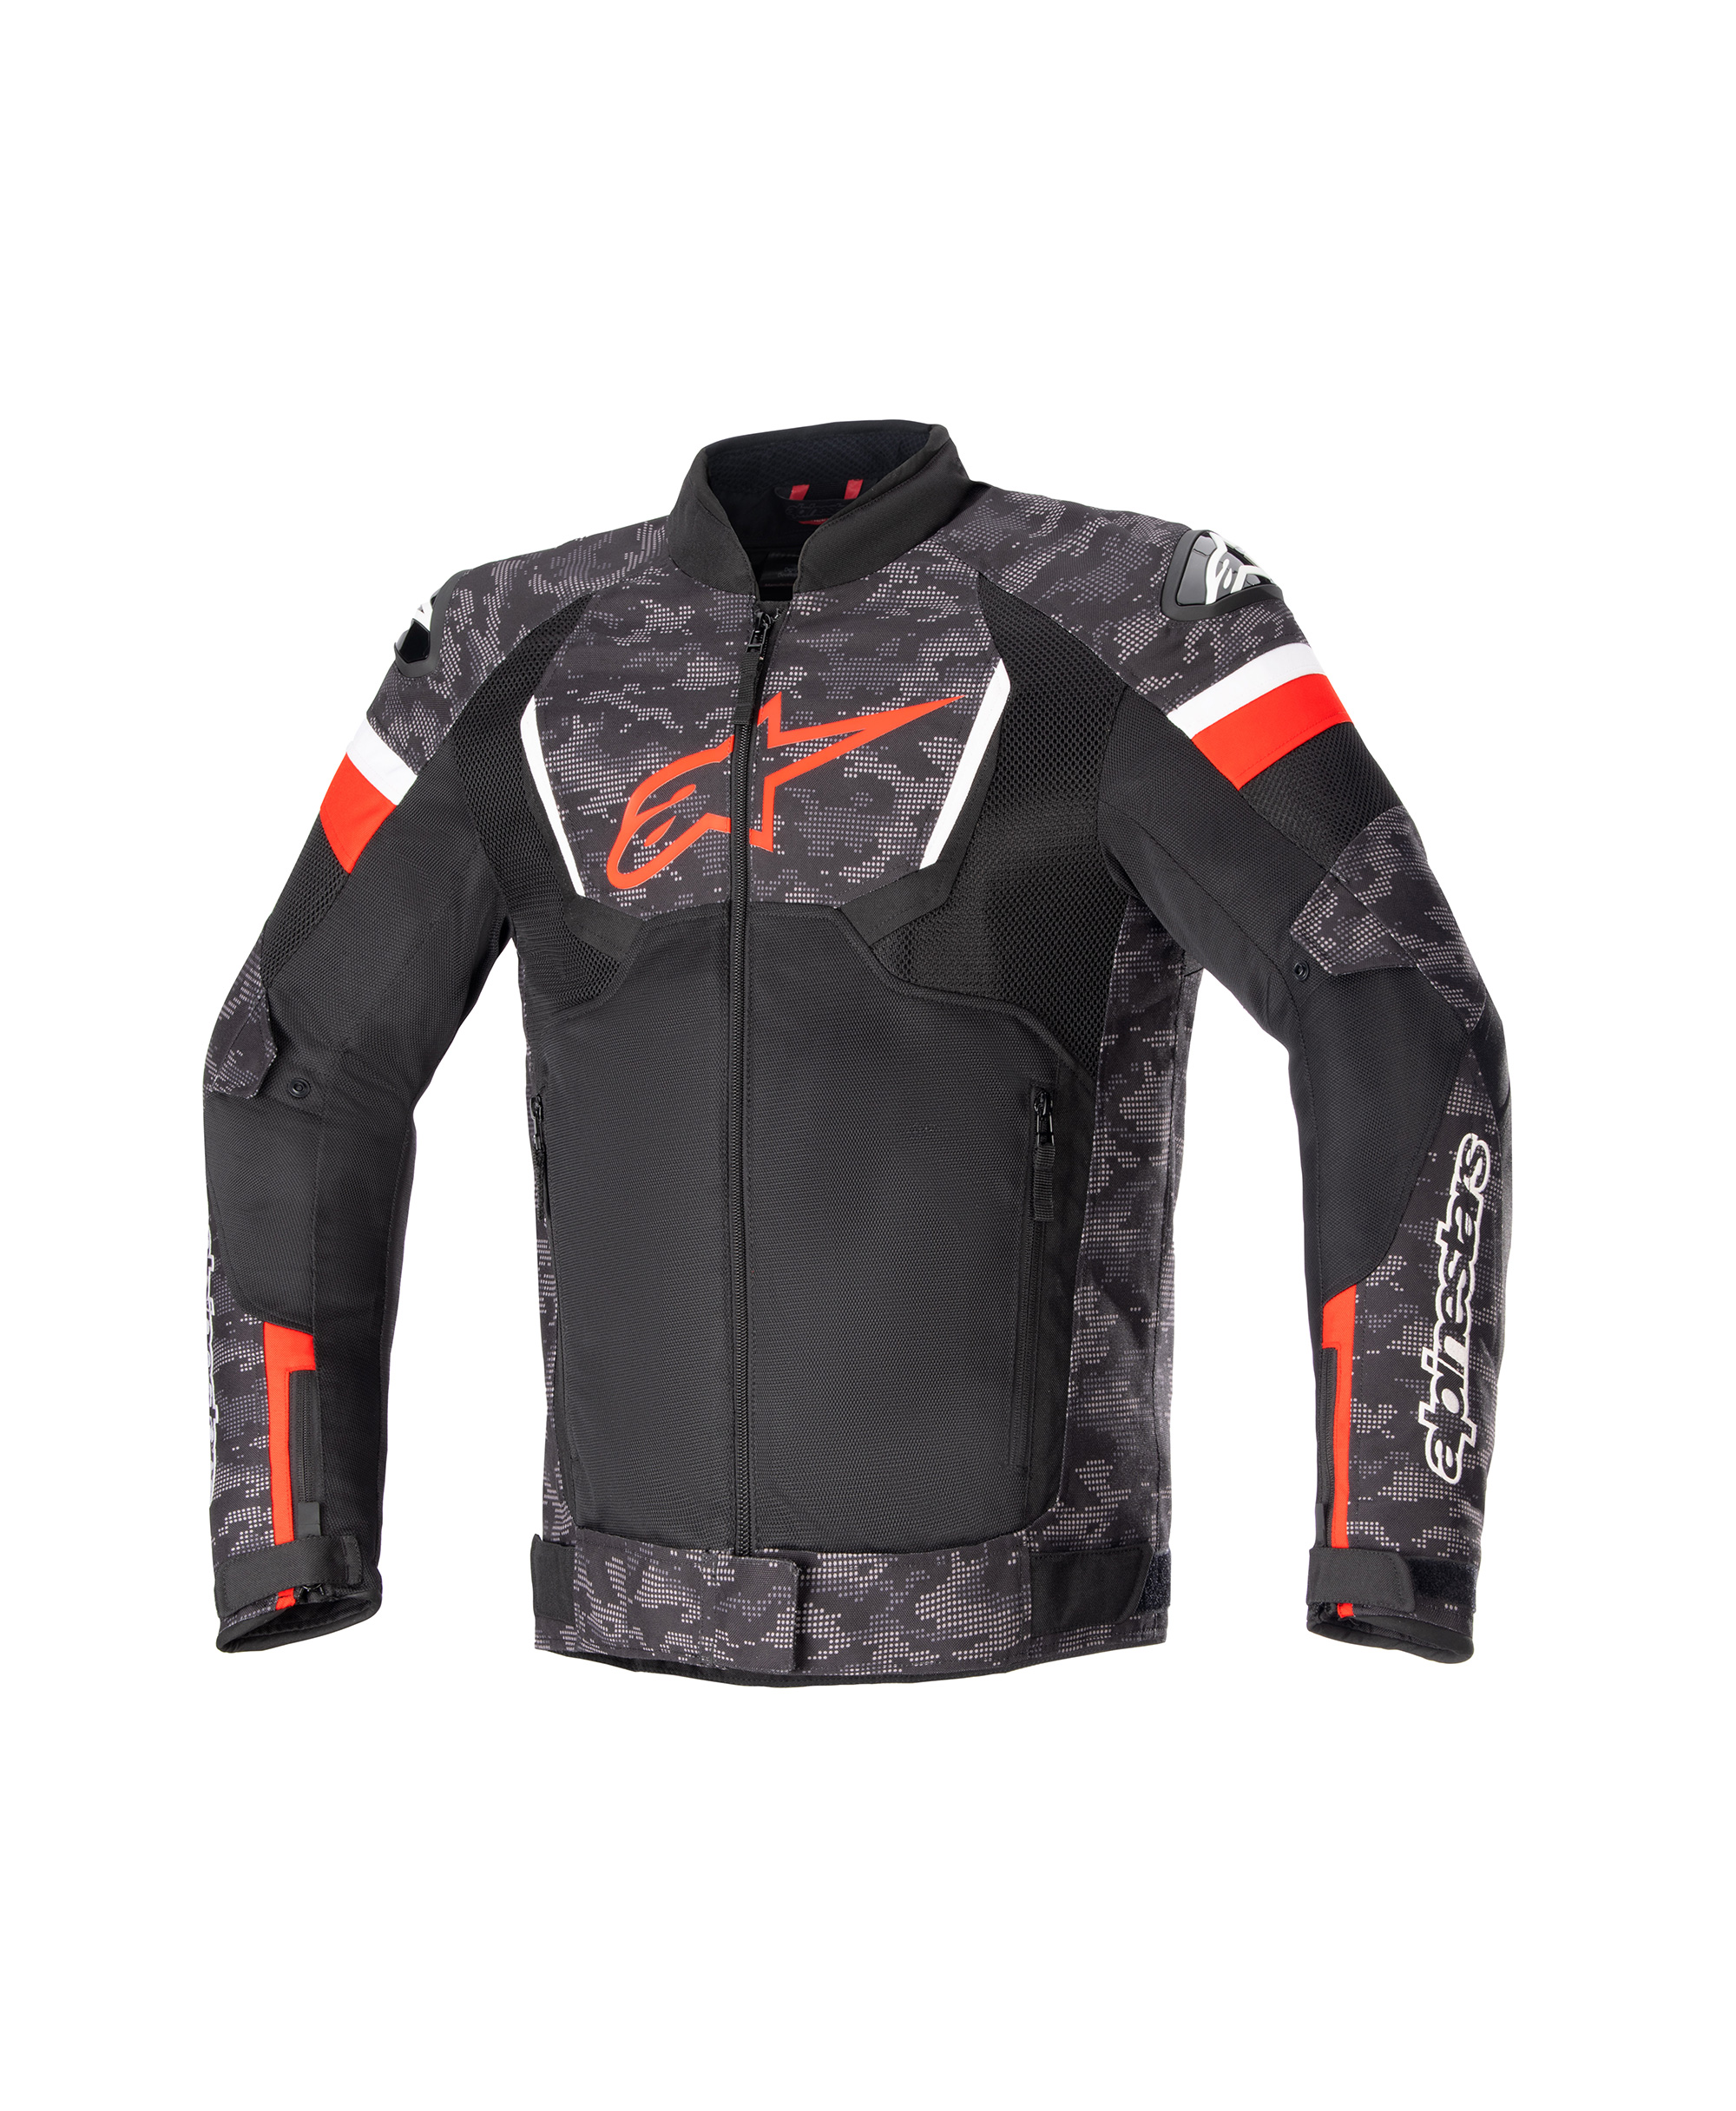 T-GP IGNITION AIR JACKET *ASIA DIGITAL CAMO BLACK BRIGHT RED